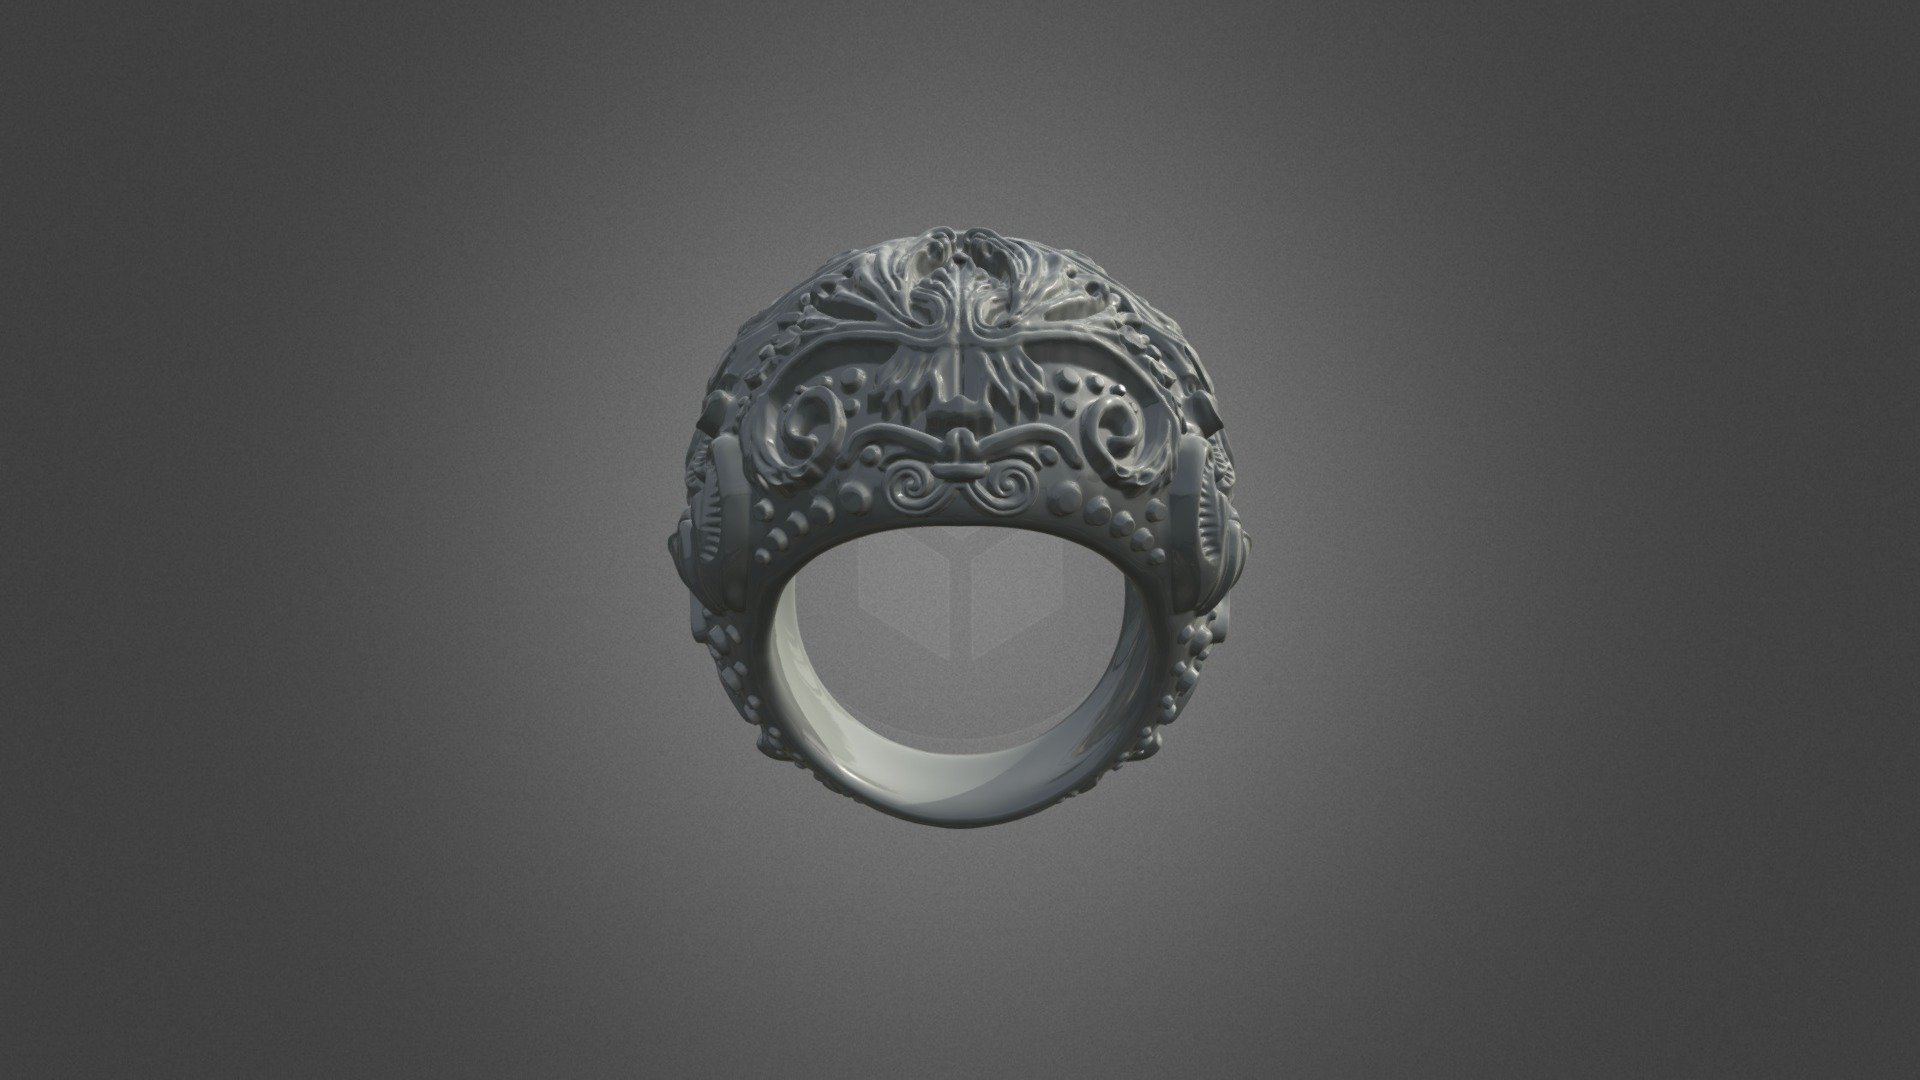 Highly detailed very ornate ring the I sculpted in the likeness of old school scrollwork for that medieval design and look. This ring is made from Argentinium Silver that has the hardness and strength of an alloy with a higher silver content than traditional sterling silver, delivering very white color, high reflectivity and hardness, which makes Jewelry made with this alloy particularly resistant to wear and scratching. The artwork of this ring in silver has been made in the same way the medieval silversmiths did according to the ancient traditions of lost wax casting. It is a solid back ring, not hallowed out under the designs, with scrollwork ranging from 2.5mm to 5mm solid around the ring, a full 30 grams of silver.   The Greenman is primarily interpreted as a symbol of rebirth, representing the cycle of growth each spring.  . Available in Silver at -link removed- - Acanthus Greenman Ring - 3D model by cerriousdesign 3d model